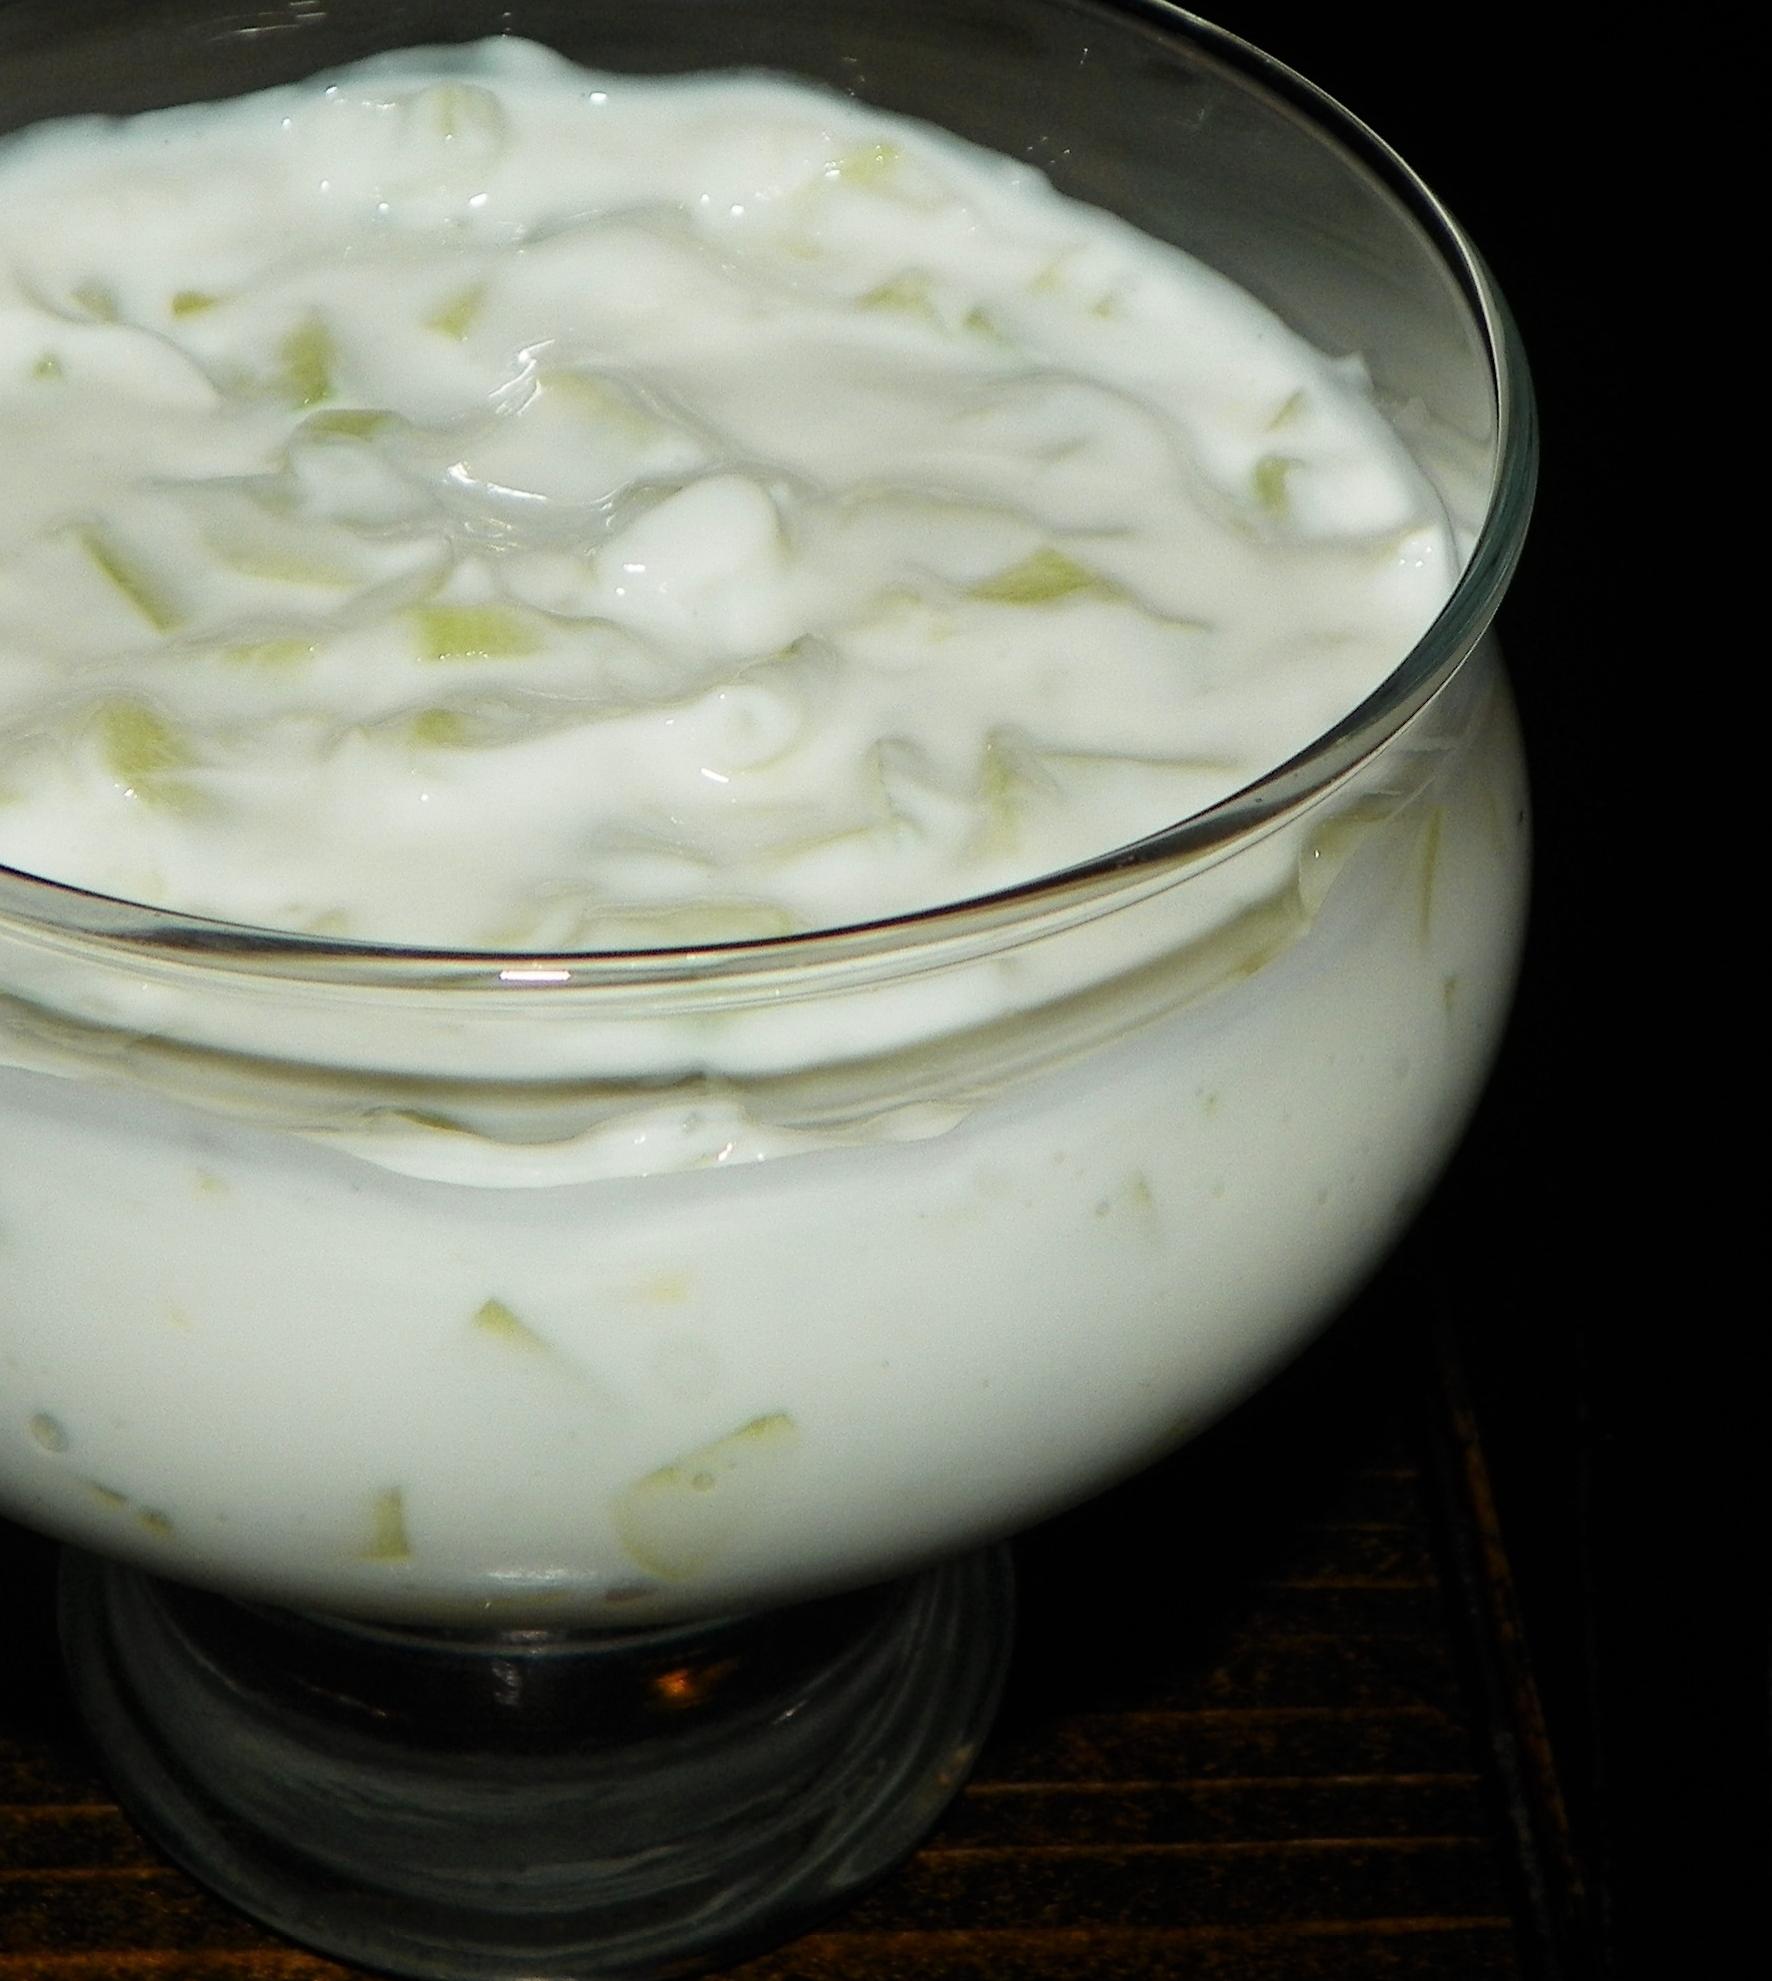  This simple recipe makes the perfect tzatziki sauce every time.